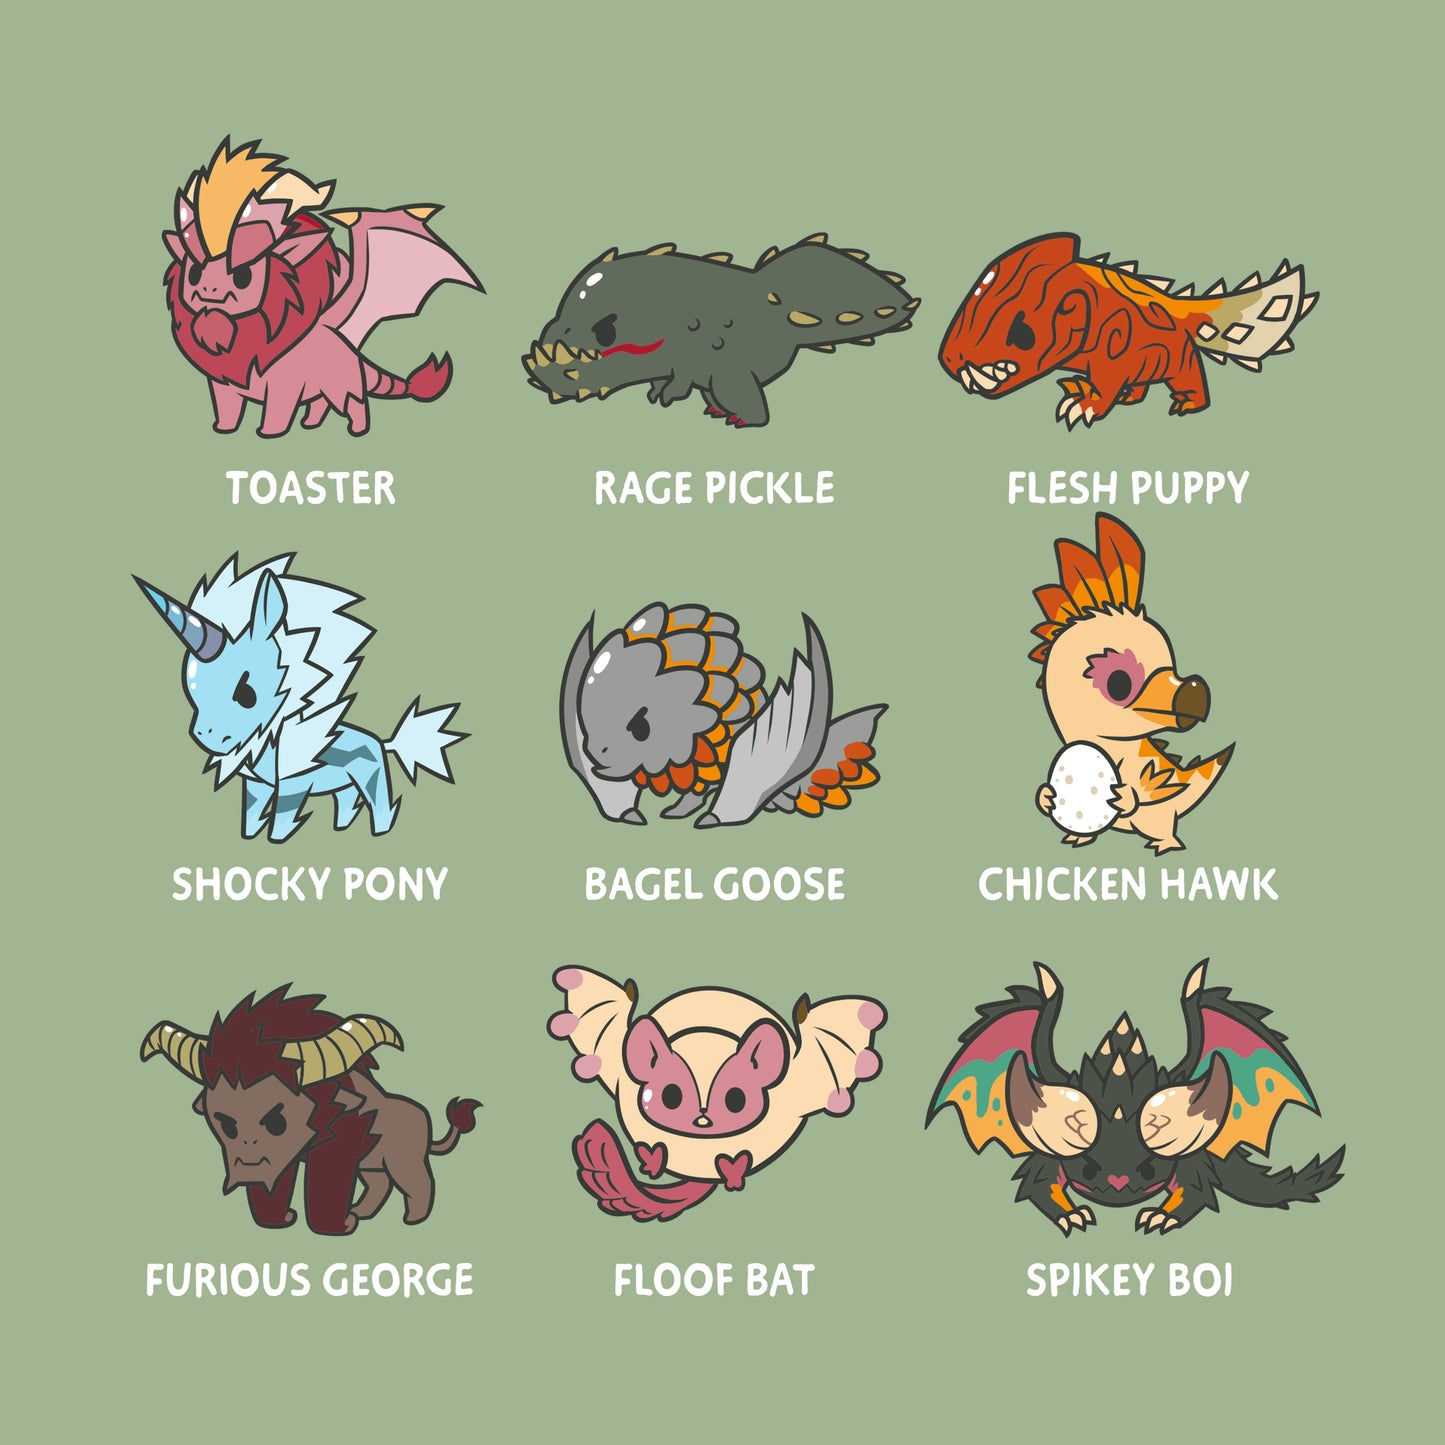 A group of different animals with different names, the Derpy Monster Hunter Grid from Monster Hunter.